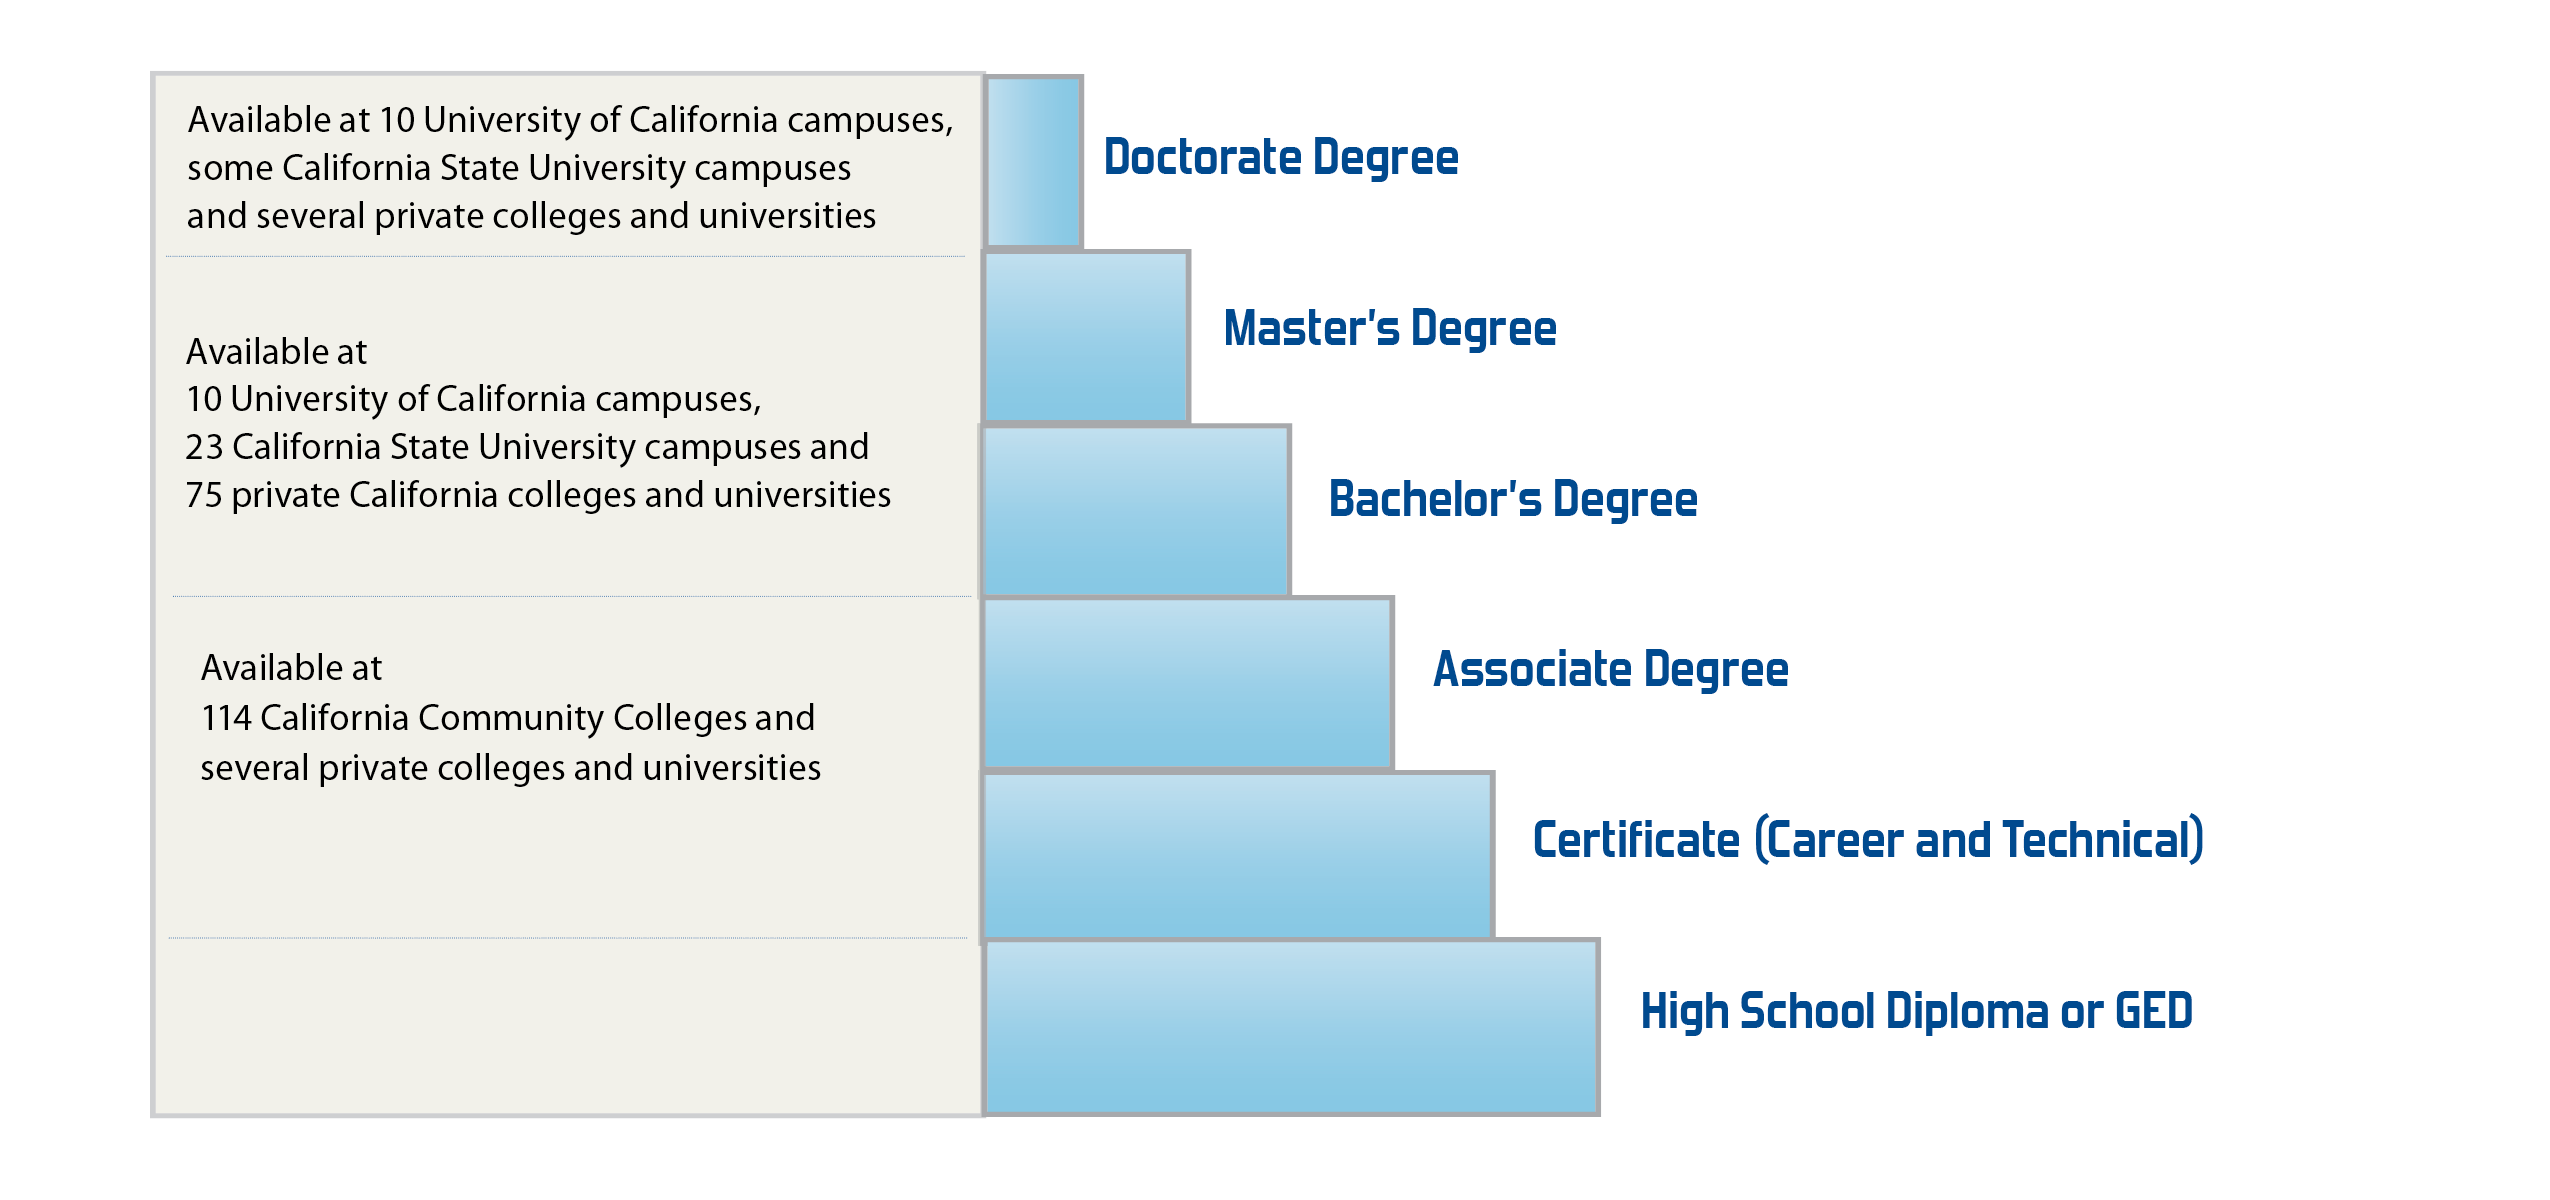 Chart showing educational options. A doctorate degree is available at universities and private colleges. Master's and bachelor's degrees are available at UC, CSU and private colleges and universities. Certificates and associate degrees are available at 114 California community colleges and several private institutions. A high school diploma or GED is the baseline to earning any of these.